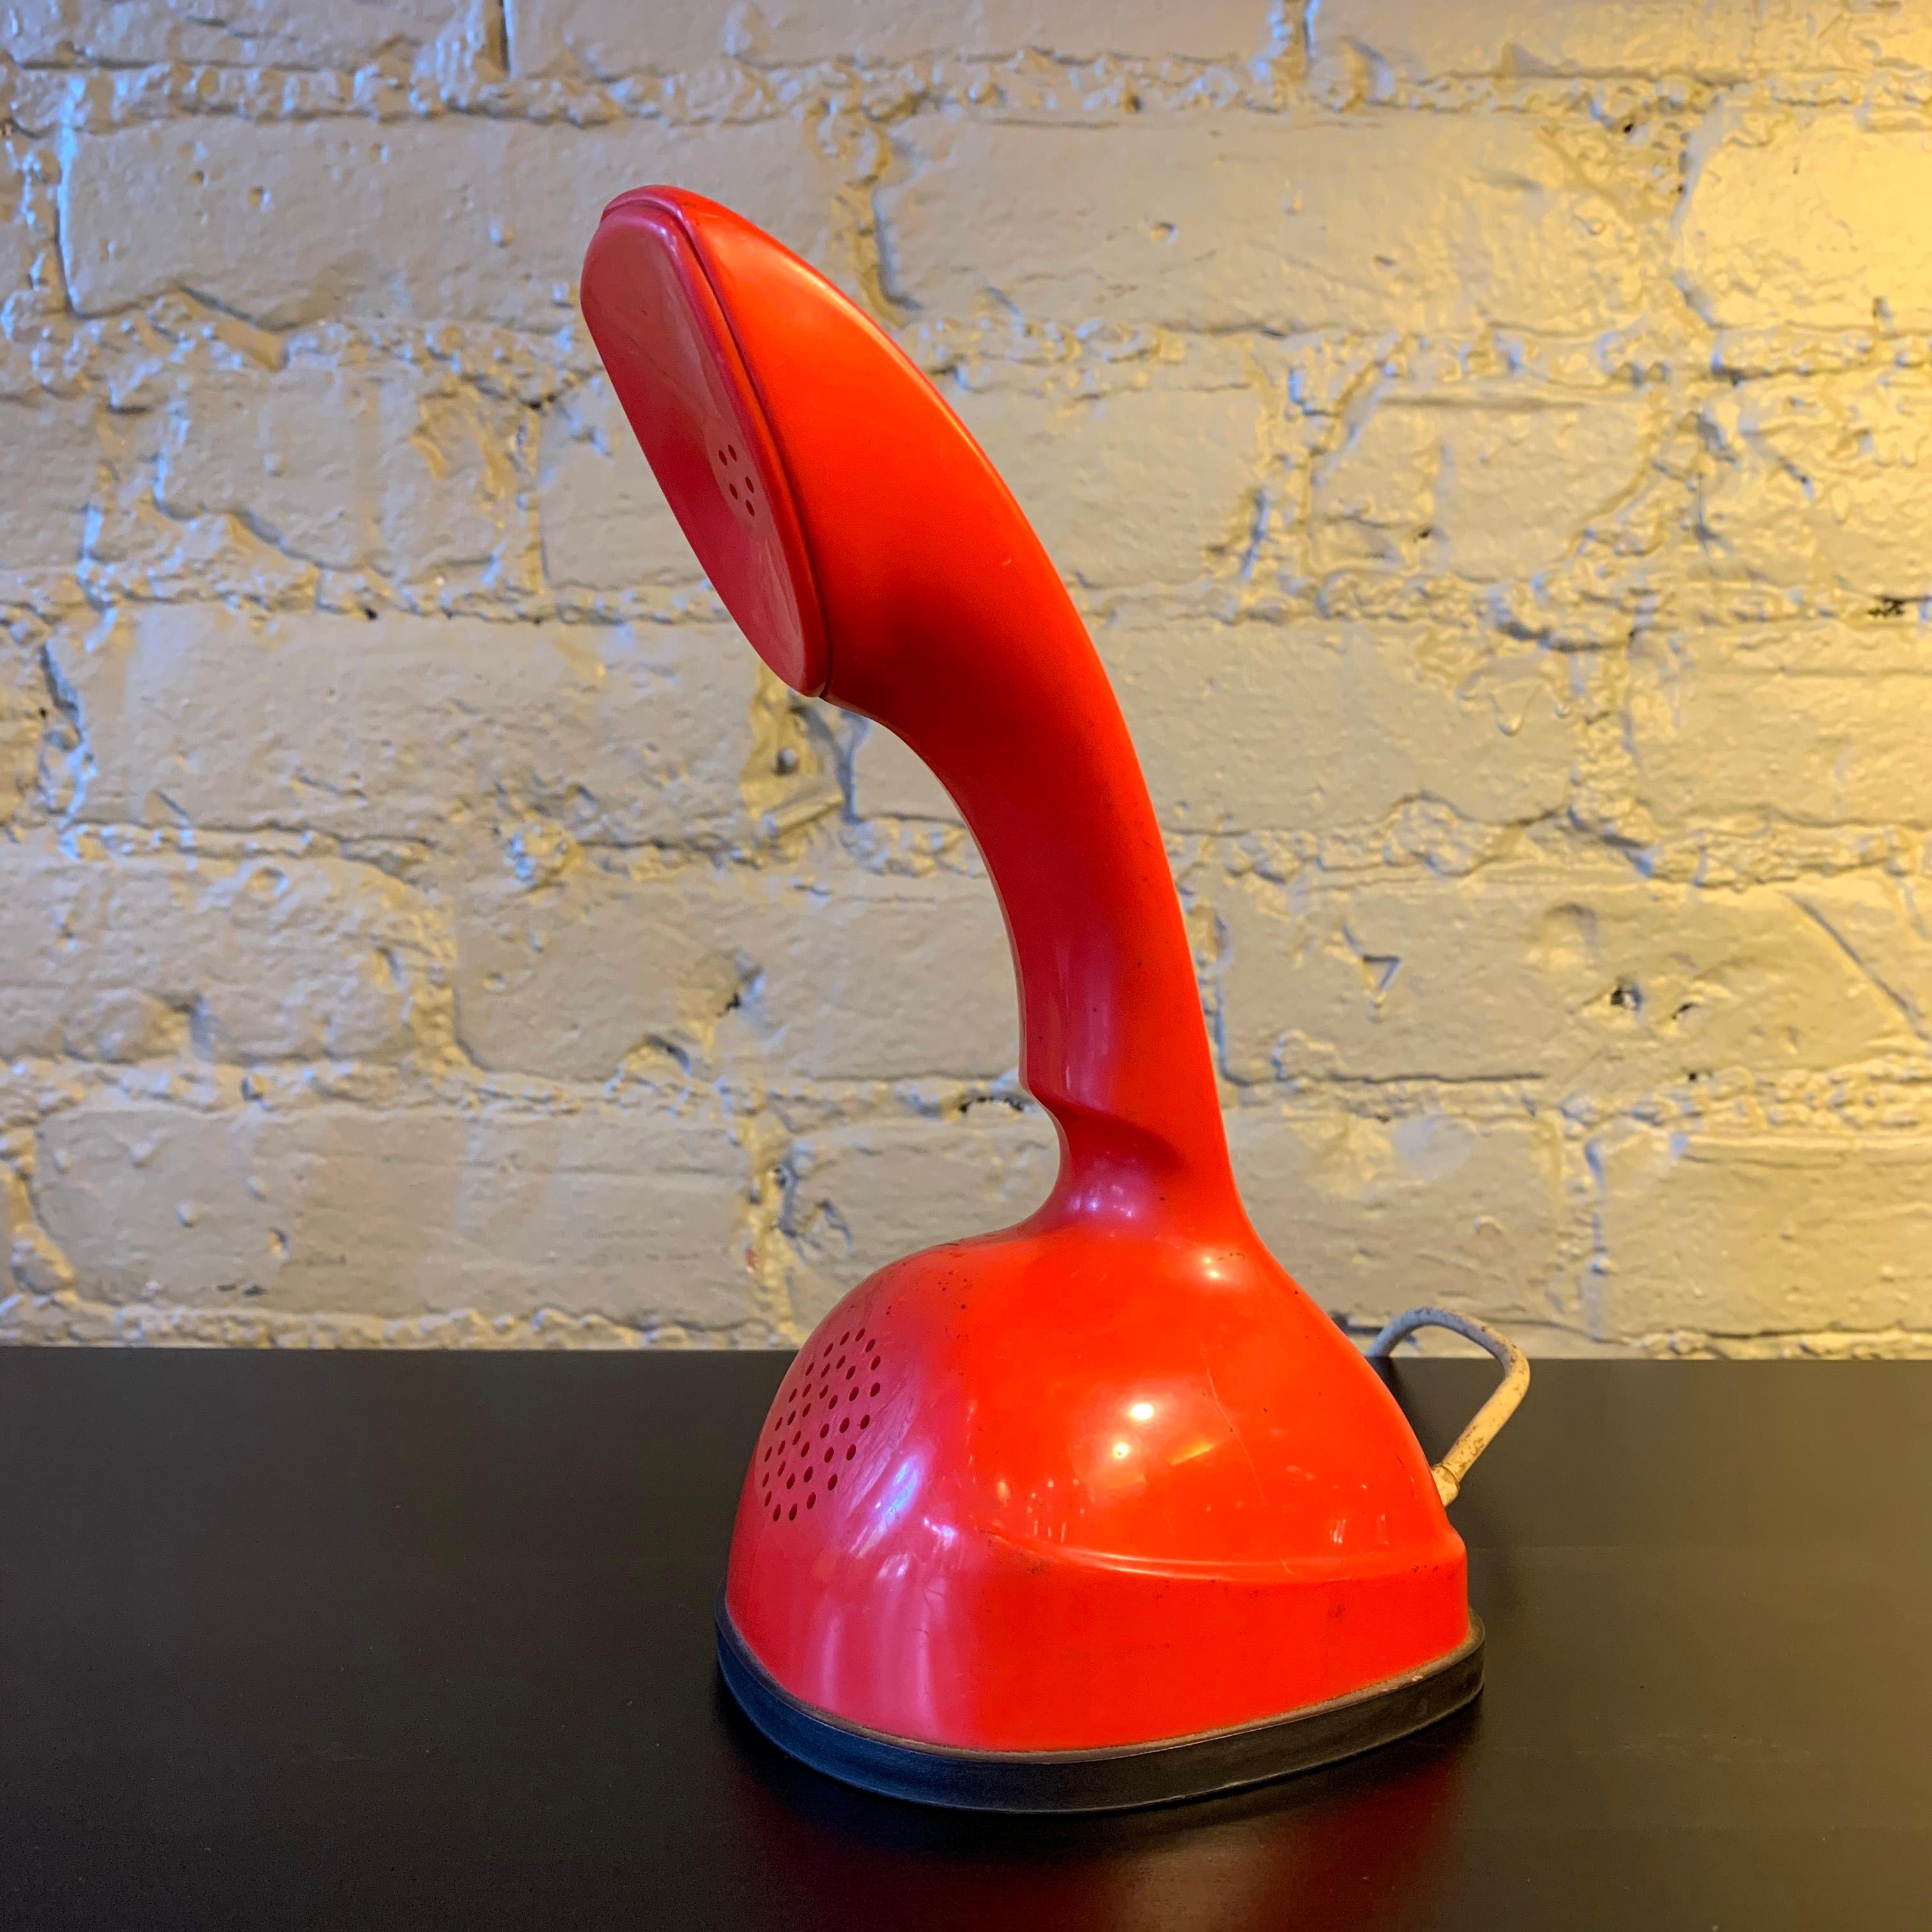 Red, modern one-piece Ericofon telephone created by the Ericsson Company of Sweden and manufactured by North Electric in Galion, Ohio features a rotary dial on the bottom. Due to its styling and its influence on future telephone design, the Ericofon